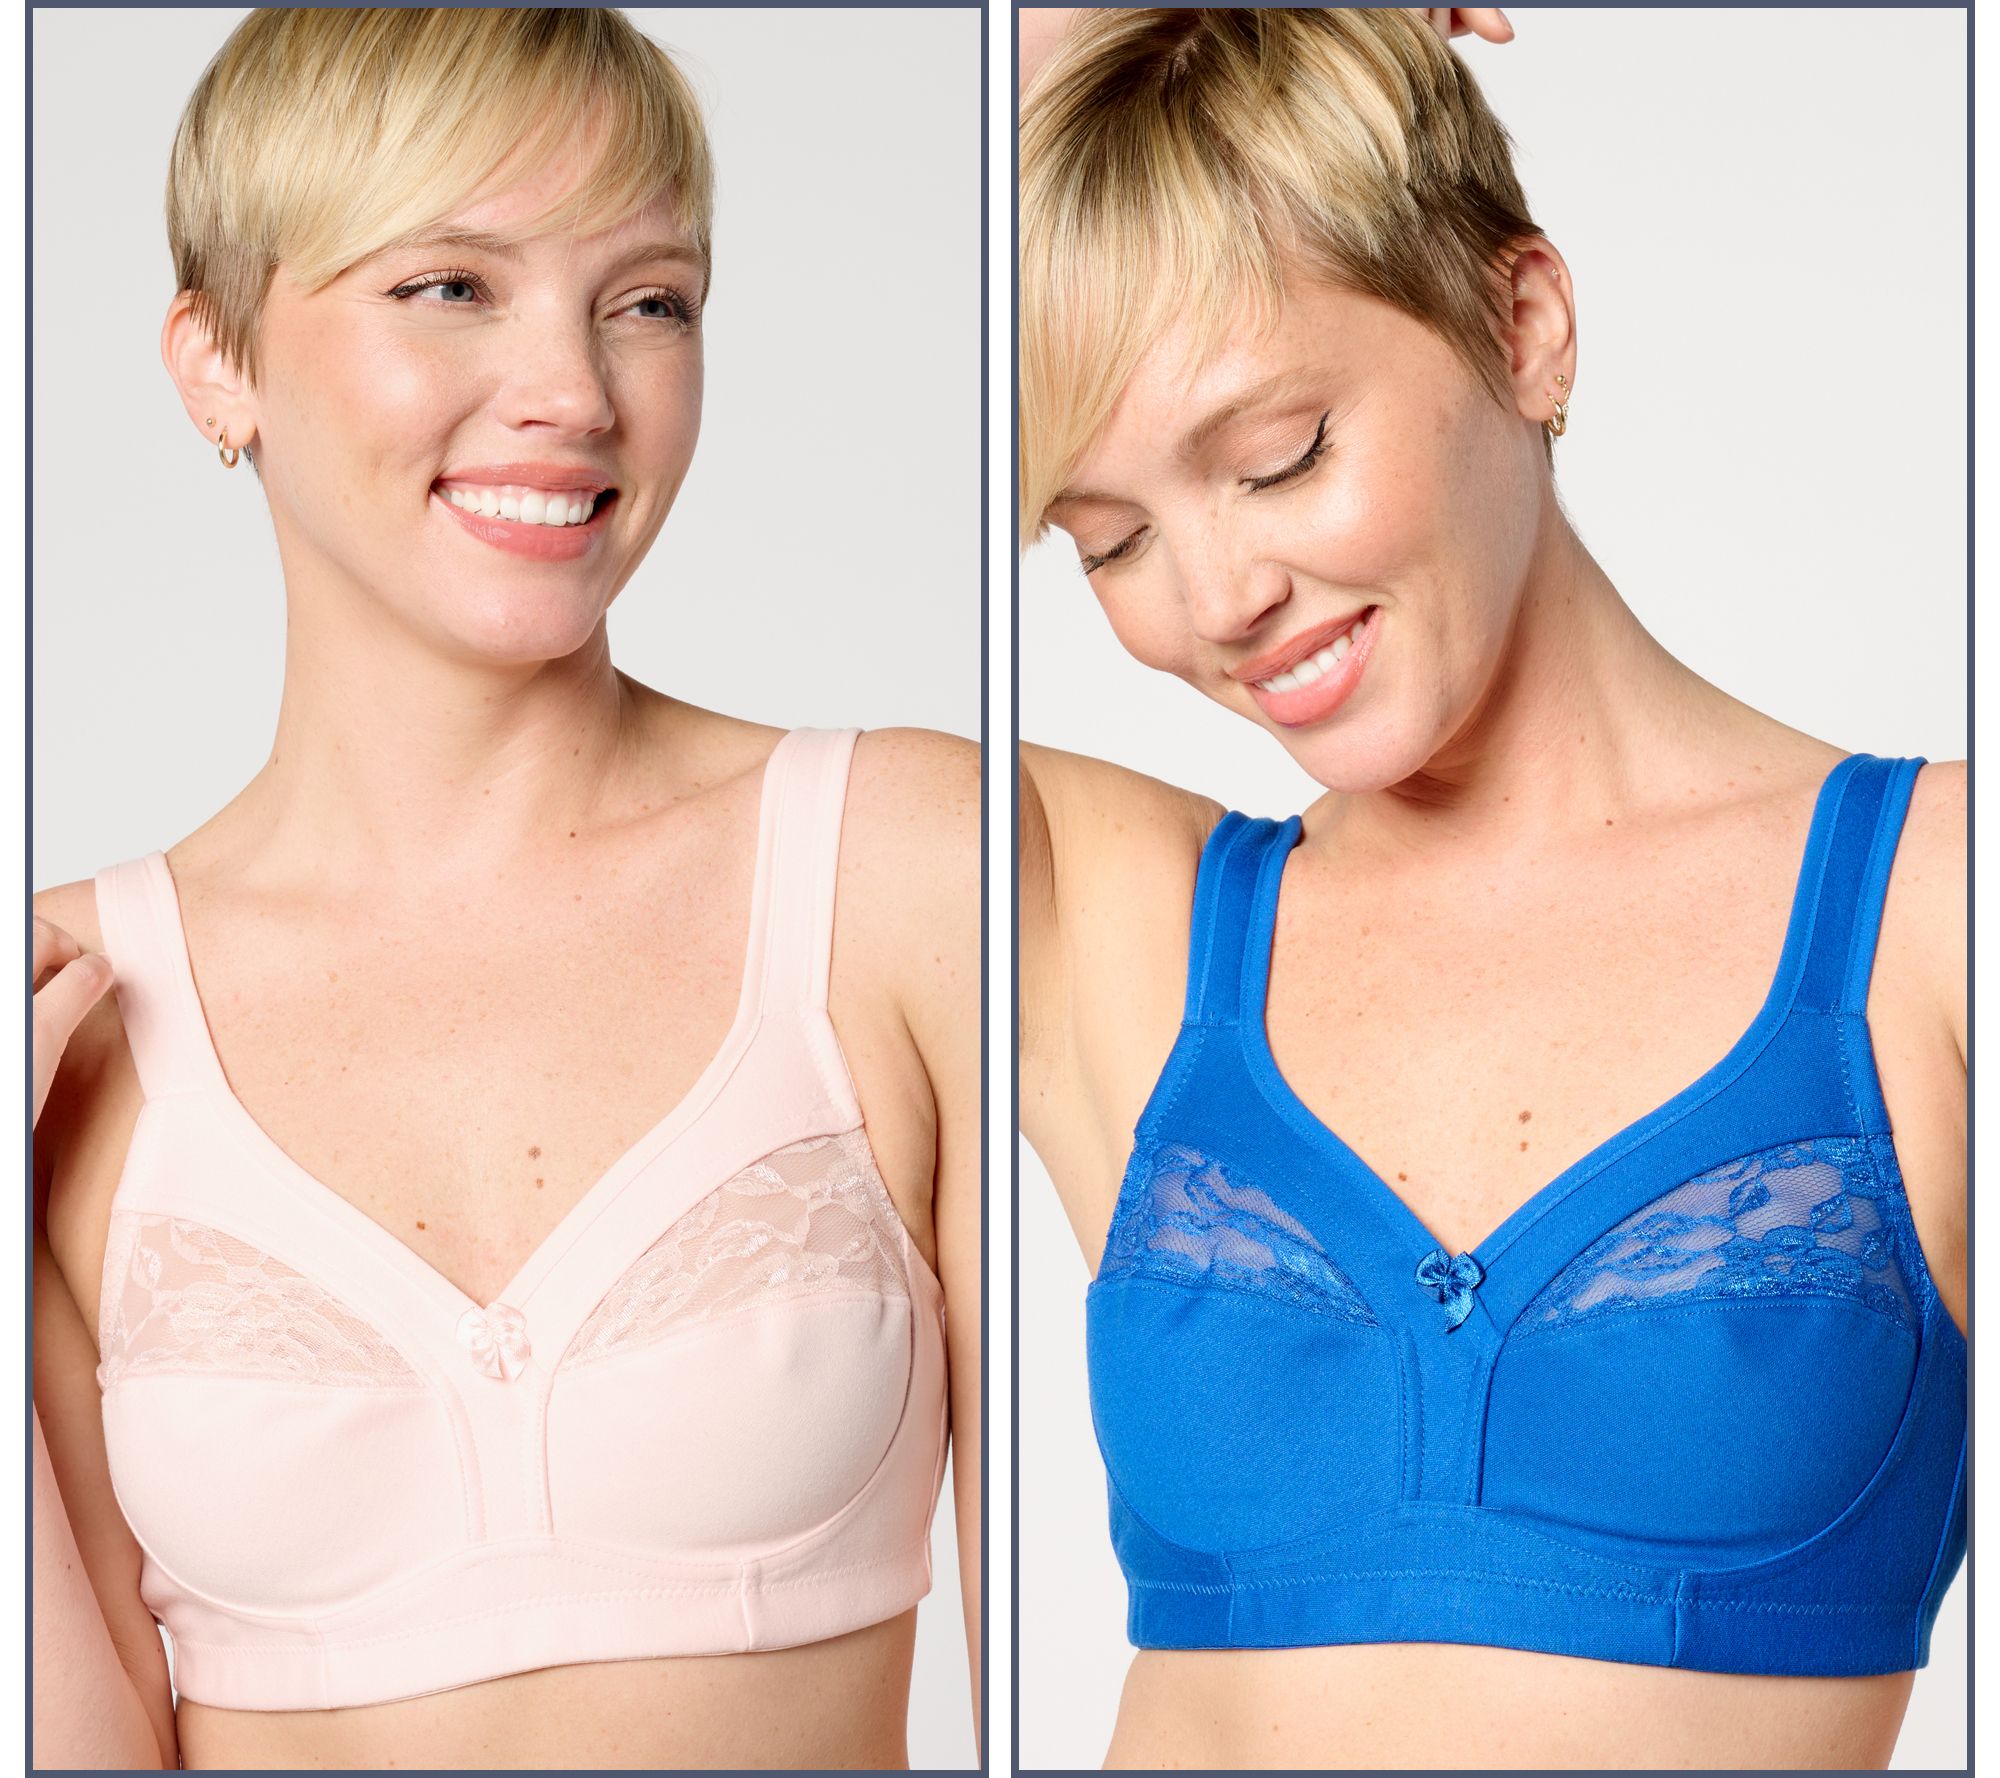 COVERED IN FULL! Soft Support, Shapely Cups, Stretchy Straps, Airy Lace, Bra  38D